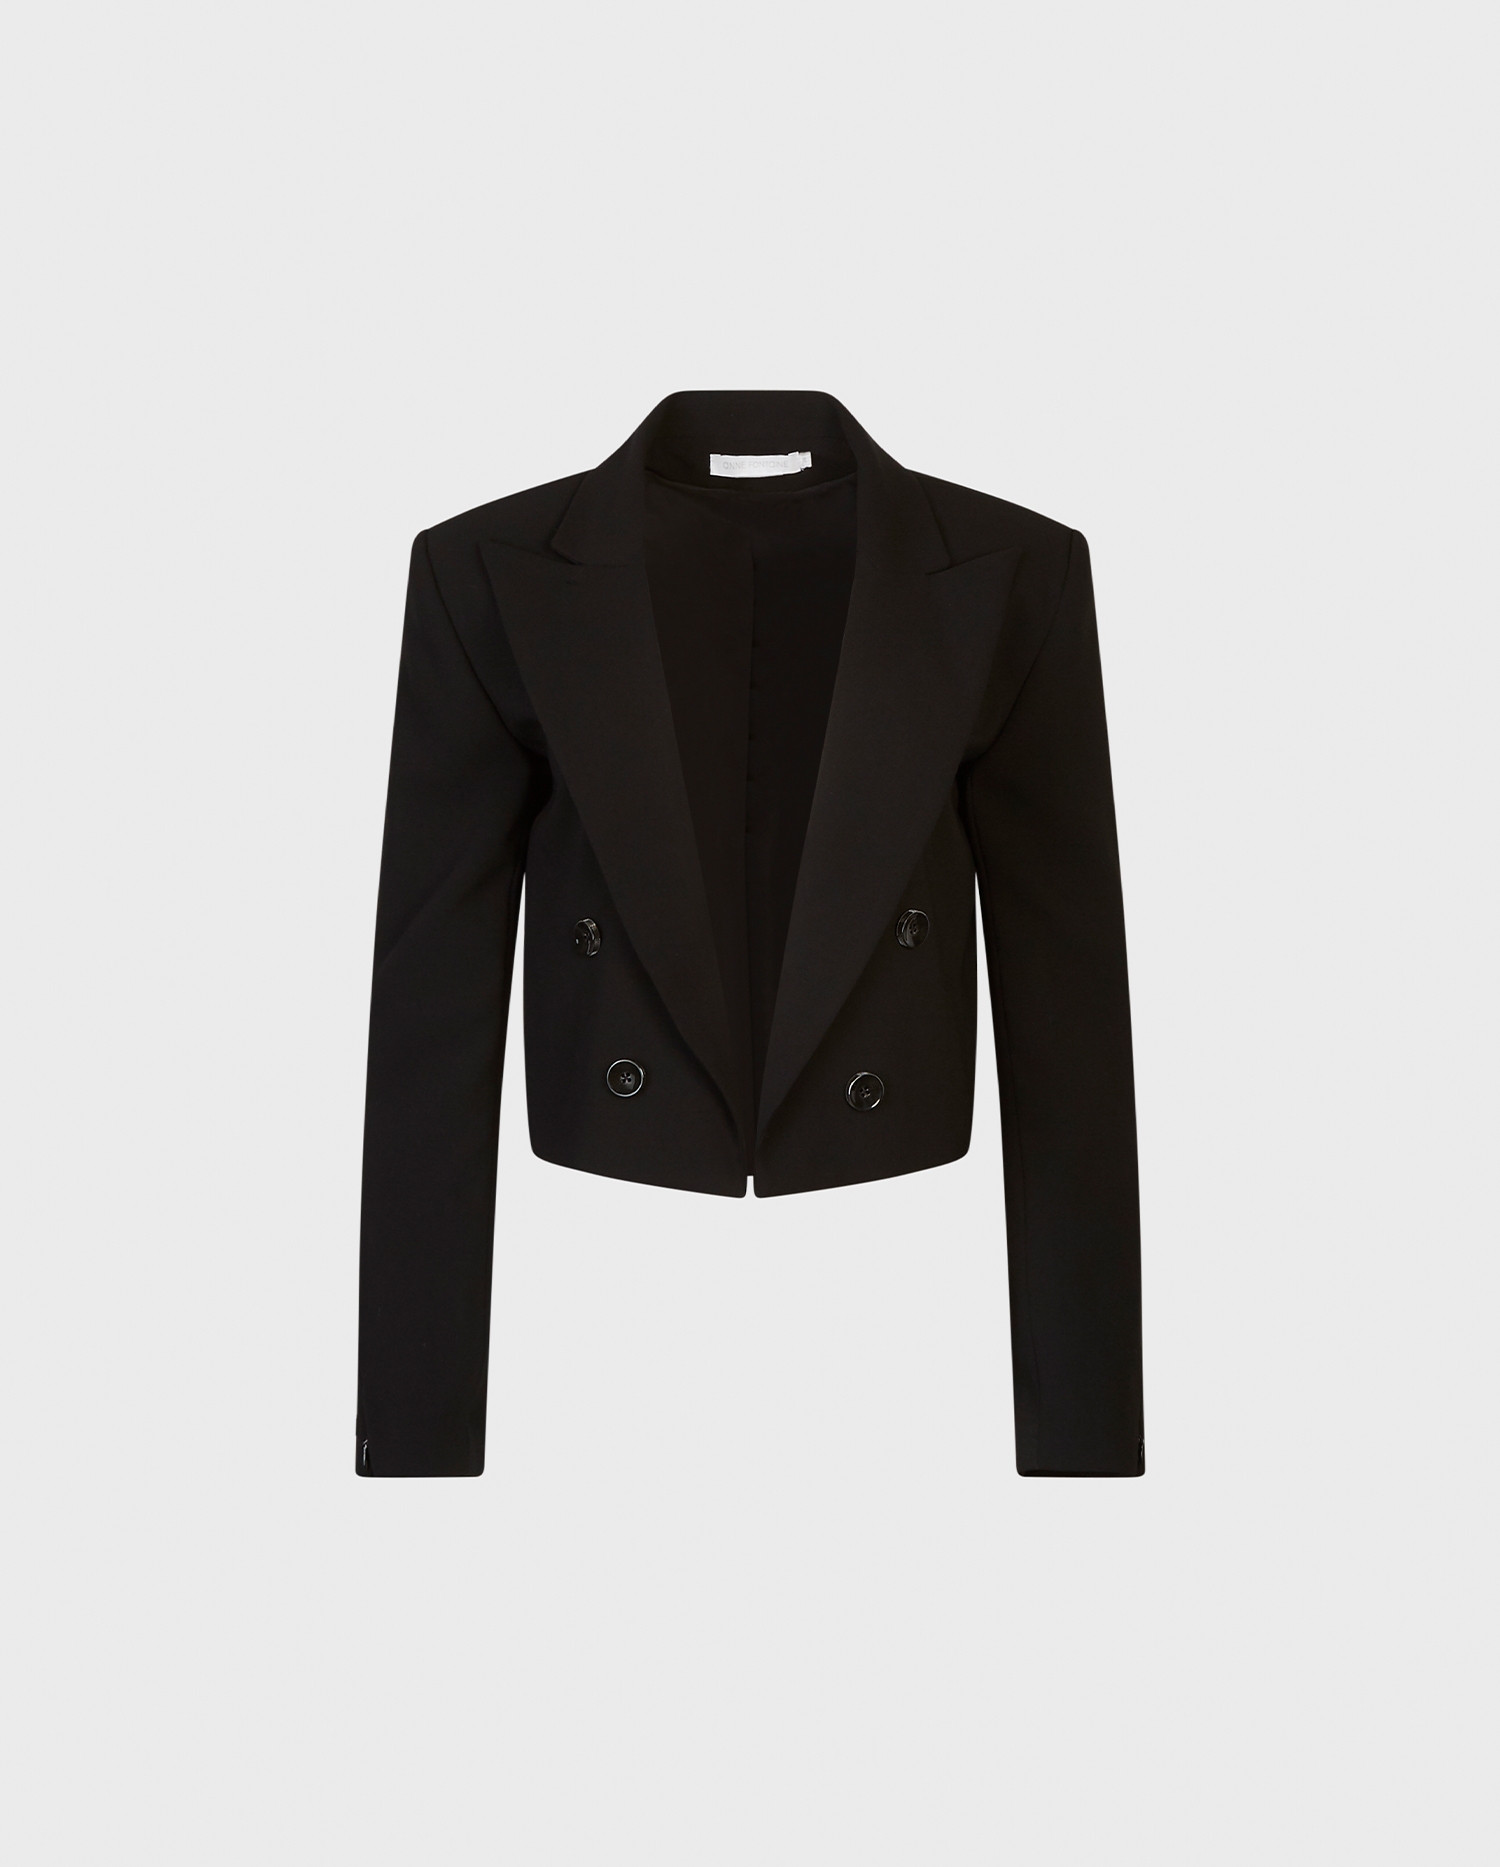 Discover The NADAR Boxy Cropped Crepe Blazer With a Notched Lapel and Structured Shoulders